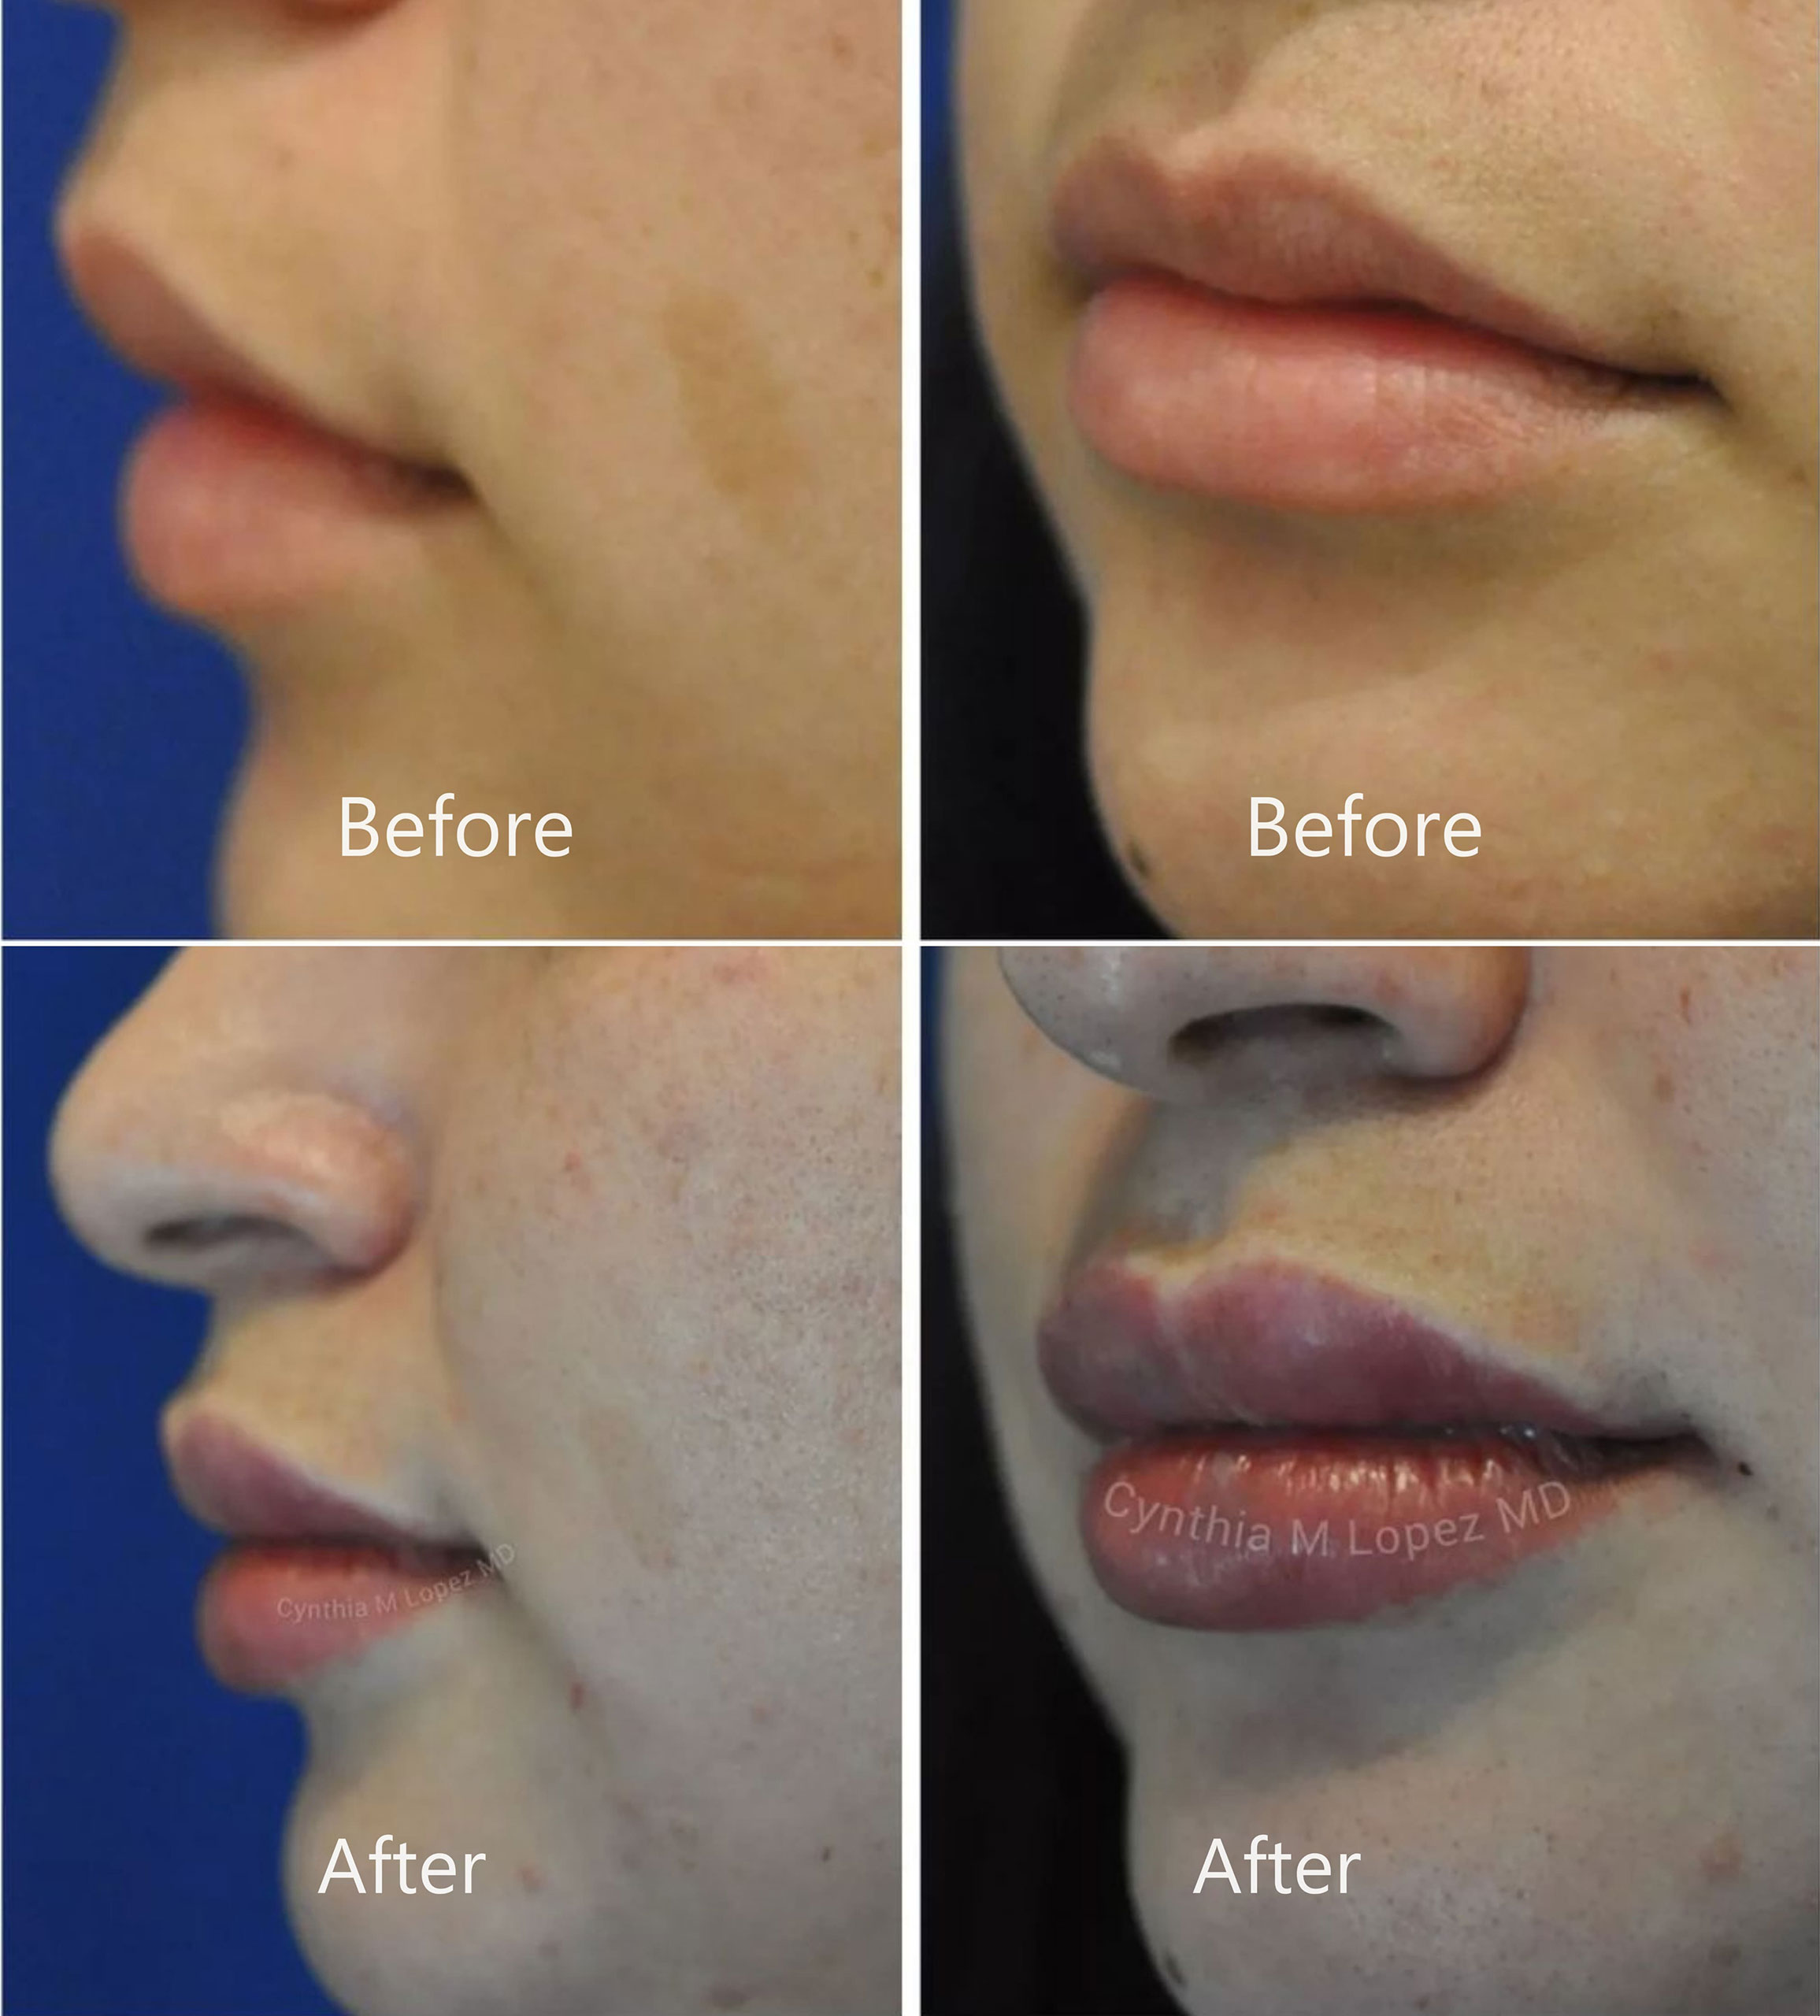 The before left images show a young female lips in her 30’s. Her top lip is moderately M shaped. The middle portion is beaky-looking. The sides have gaps and folds towards the teeth. She wants to have more lip show on the sides and fill in the gaps. The after right images show naturally plumped-up lips after injection of hyaluronic acid filler. Her side lips now fuller and gaps gone, her cupid’s bow more defined and perky with a natural-looking pout.